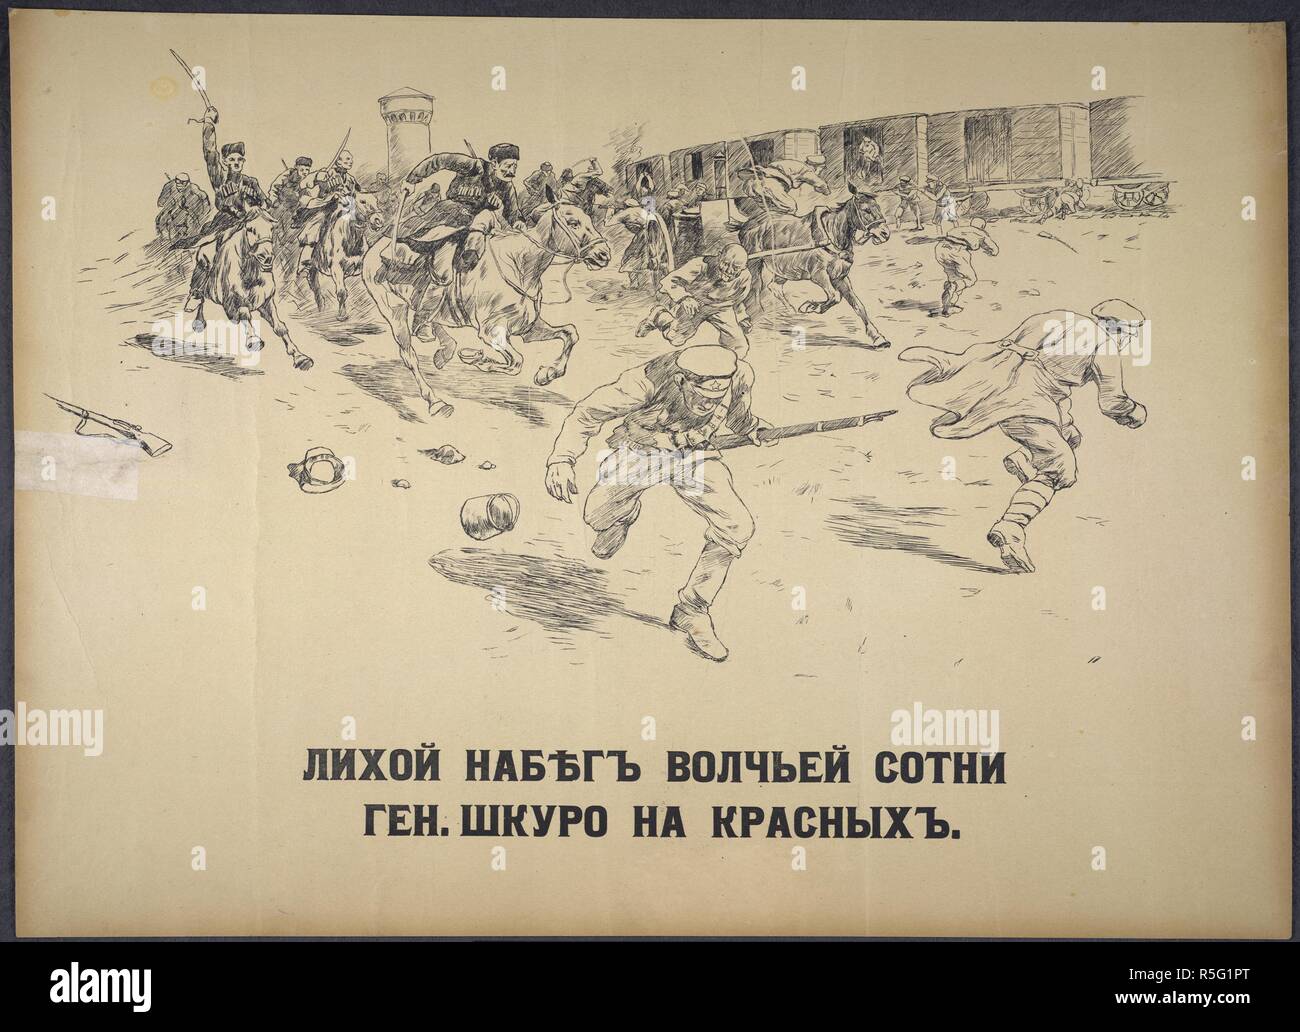 Ð›Ð¸Ñ…Ð¾Ð¹ Ð½Ð°Ð±ÐµÐ³ Ð²Ð¾Ð»Ñ‡ÑŒÐµÐ¹ ÑÐ¾Ñ‚Ð½Ð¸ Ð³ÐµÐ½. Ð¨ÐºÑƒÑ€Ð¾ Ð½Ð° ÐºÑ€Ð°ÑÐ½Ñ‹Ñ….  Daring raid by General Shkuroâ€™s hundred squad â€˜wolvesâ€™ on the Reds.  Poster depicts Cossack soldiers charging down fleeing Red Army men.  Andrei Grigoriyevich Shkuro (ÐÐ½Ð´Ñ€ÐµÐ¹ Ð“Ñ€Ð¸Ð³Ð¾Ñ€ÑŒÐµÐ²Ð¸Ñ‡ Ð¨ÐºÑƒÑ€Ð¾) (19 January 1887 (O.S.: 7 January) â€“ 17 January 1947) was a Lieutenant General (1919) of the White Army. . [A collection of posters issued by the Southern anti-Bolshevik armies.]. [1918-21]. Source: 1856.g.8.(24). Stock Photo